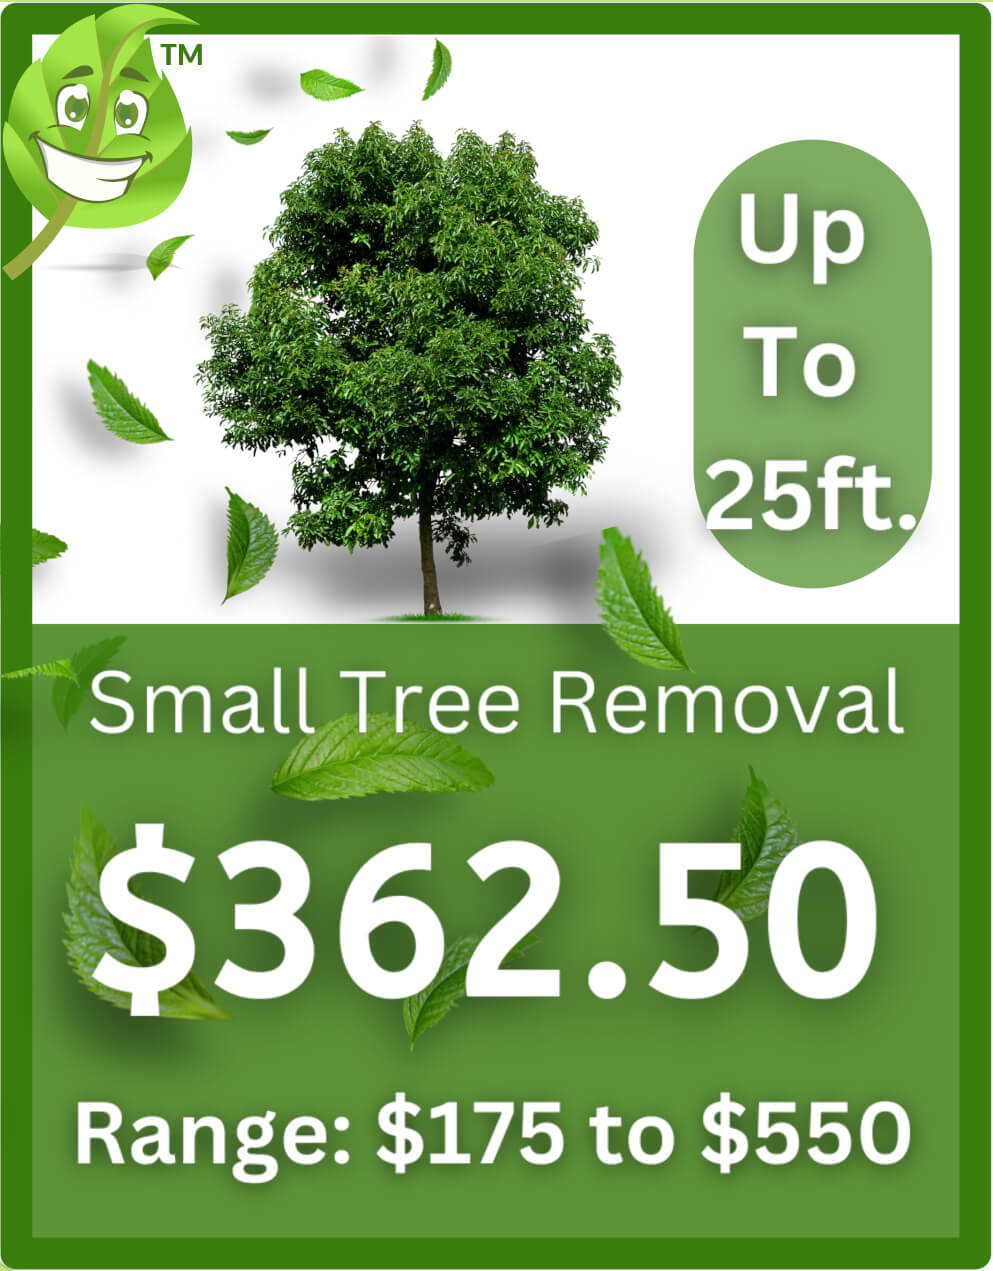 Small Tree Removal Cost Infographic